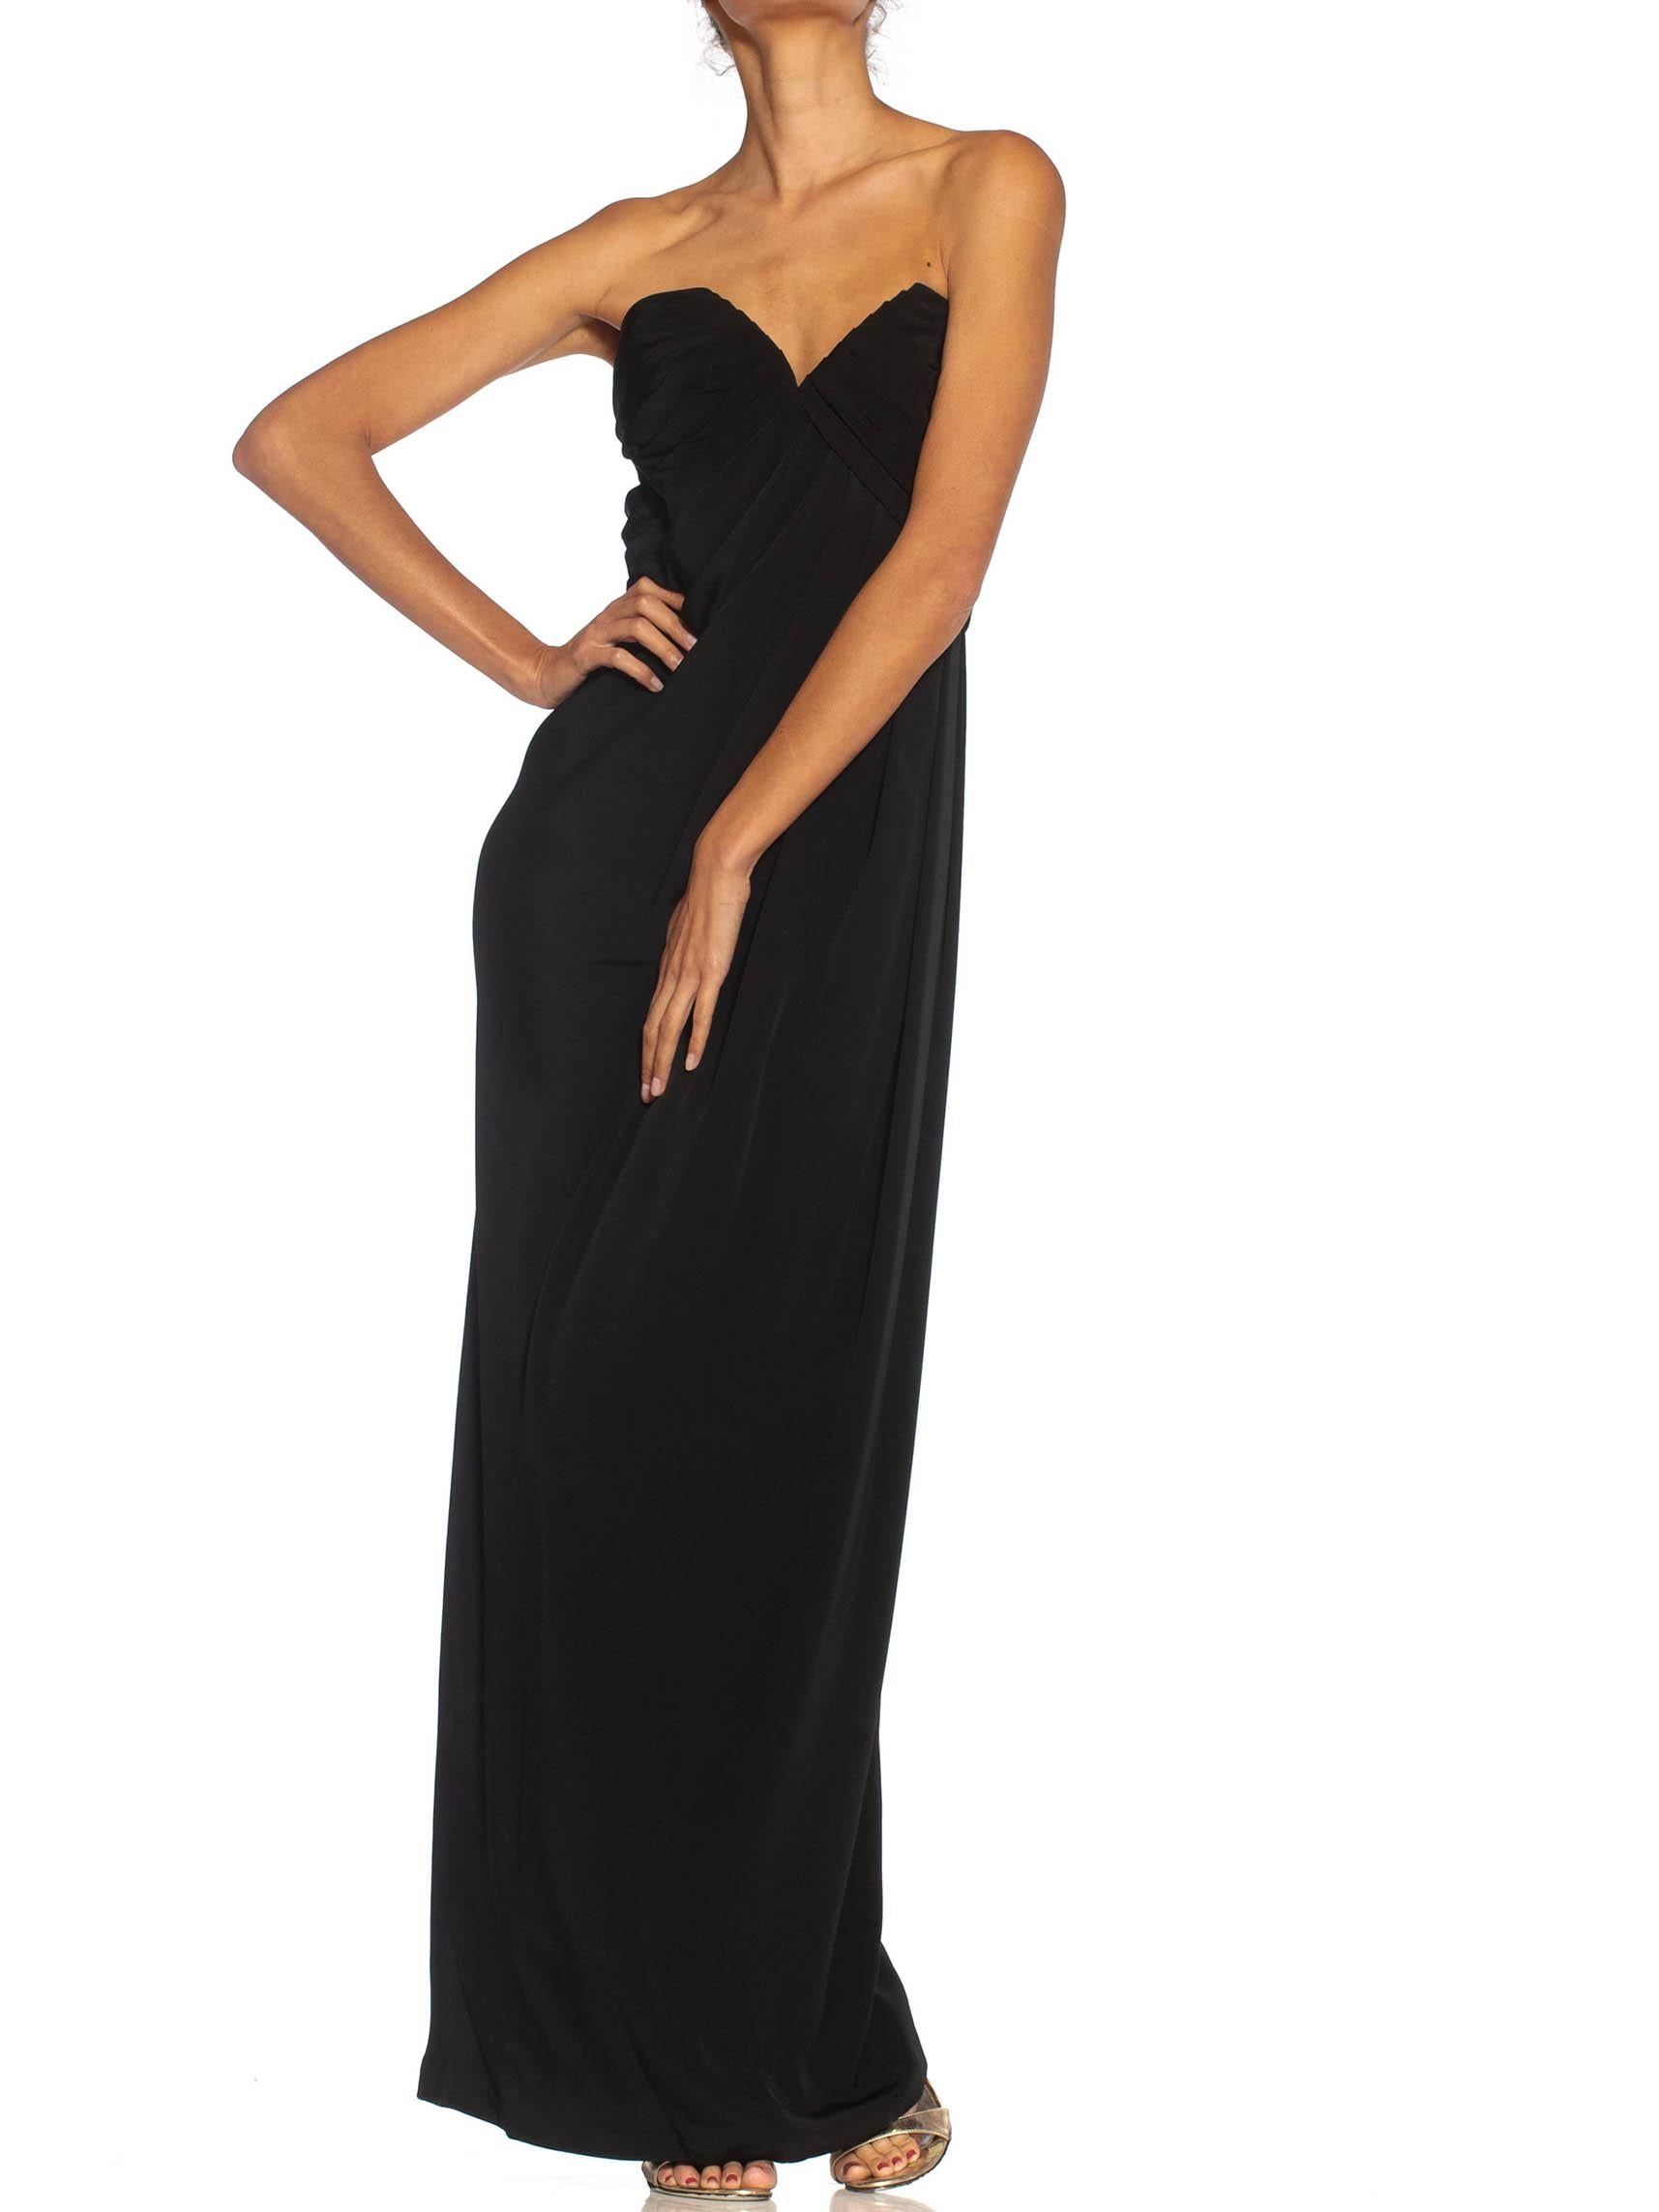 1980S GIVENCHY Black Haute Couture Silk Crepe Strapless Gown For Sale 4